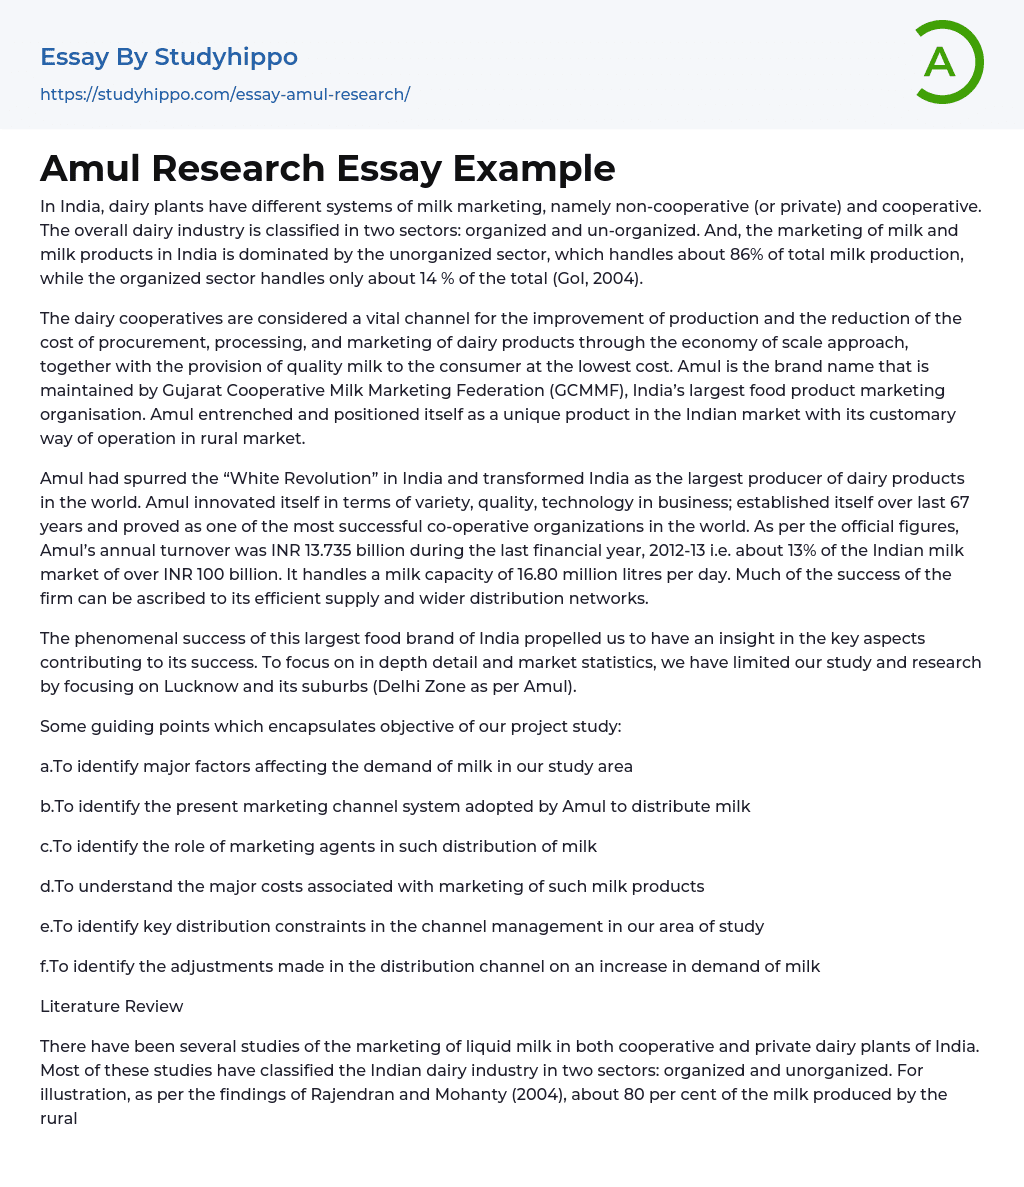 Amul Research Essay Example